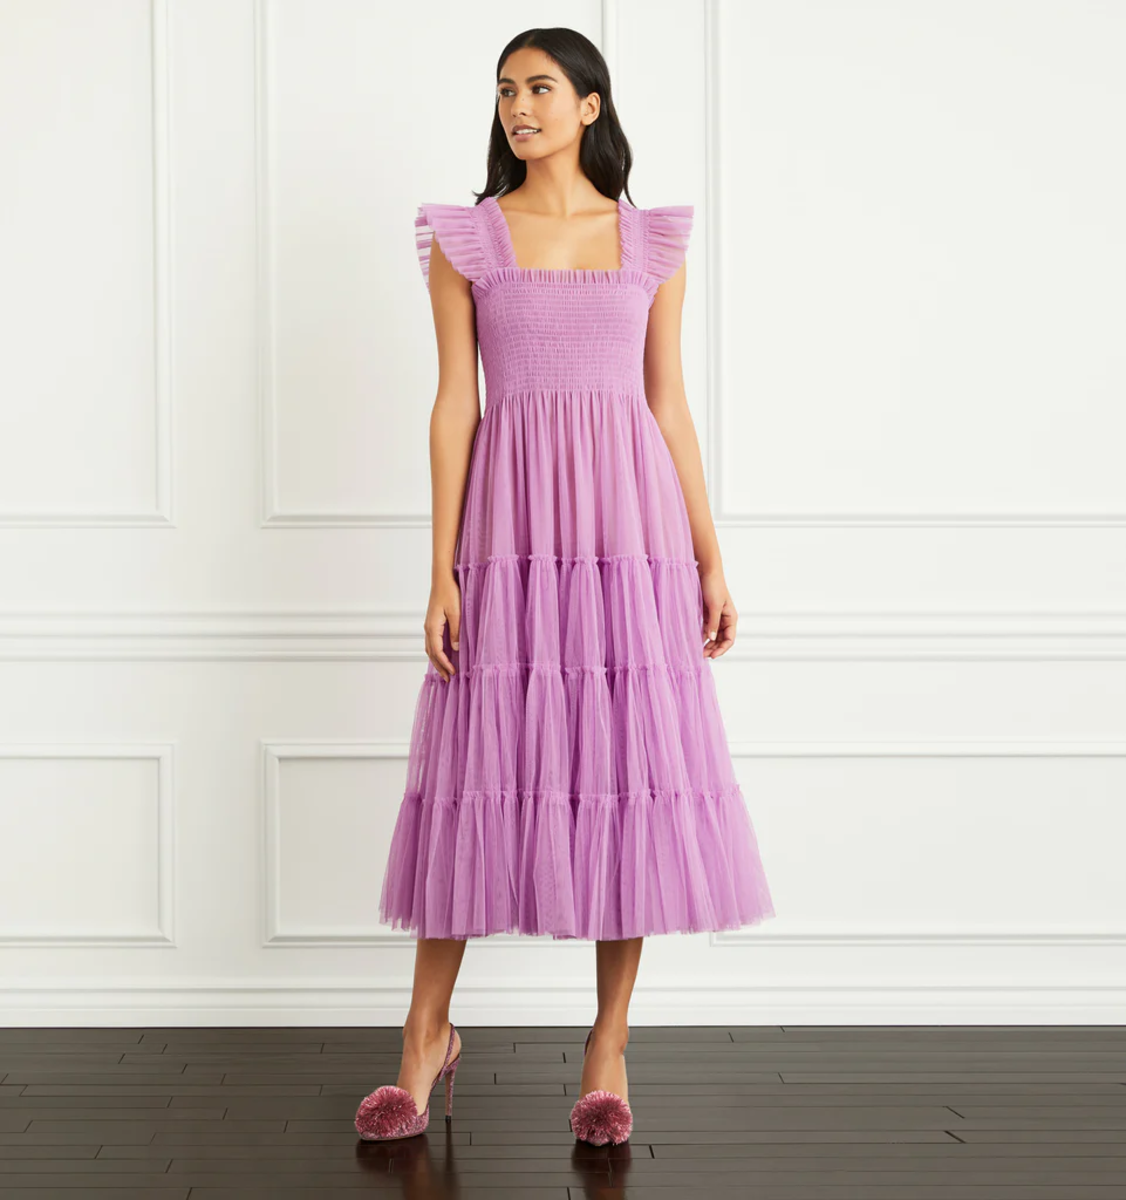 Hill House Home The Collector’s Edition Ellie Nap Dress in Lilac Sky Tulle